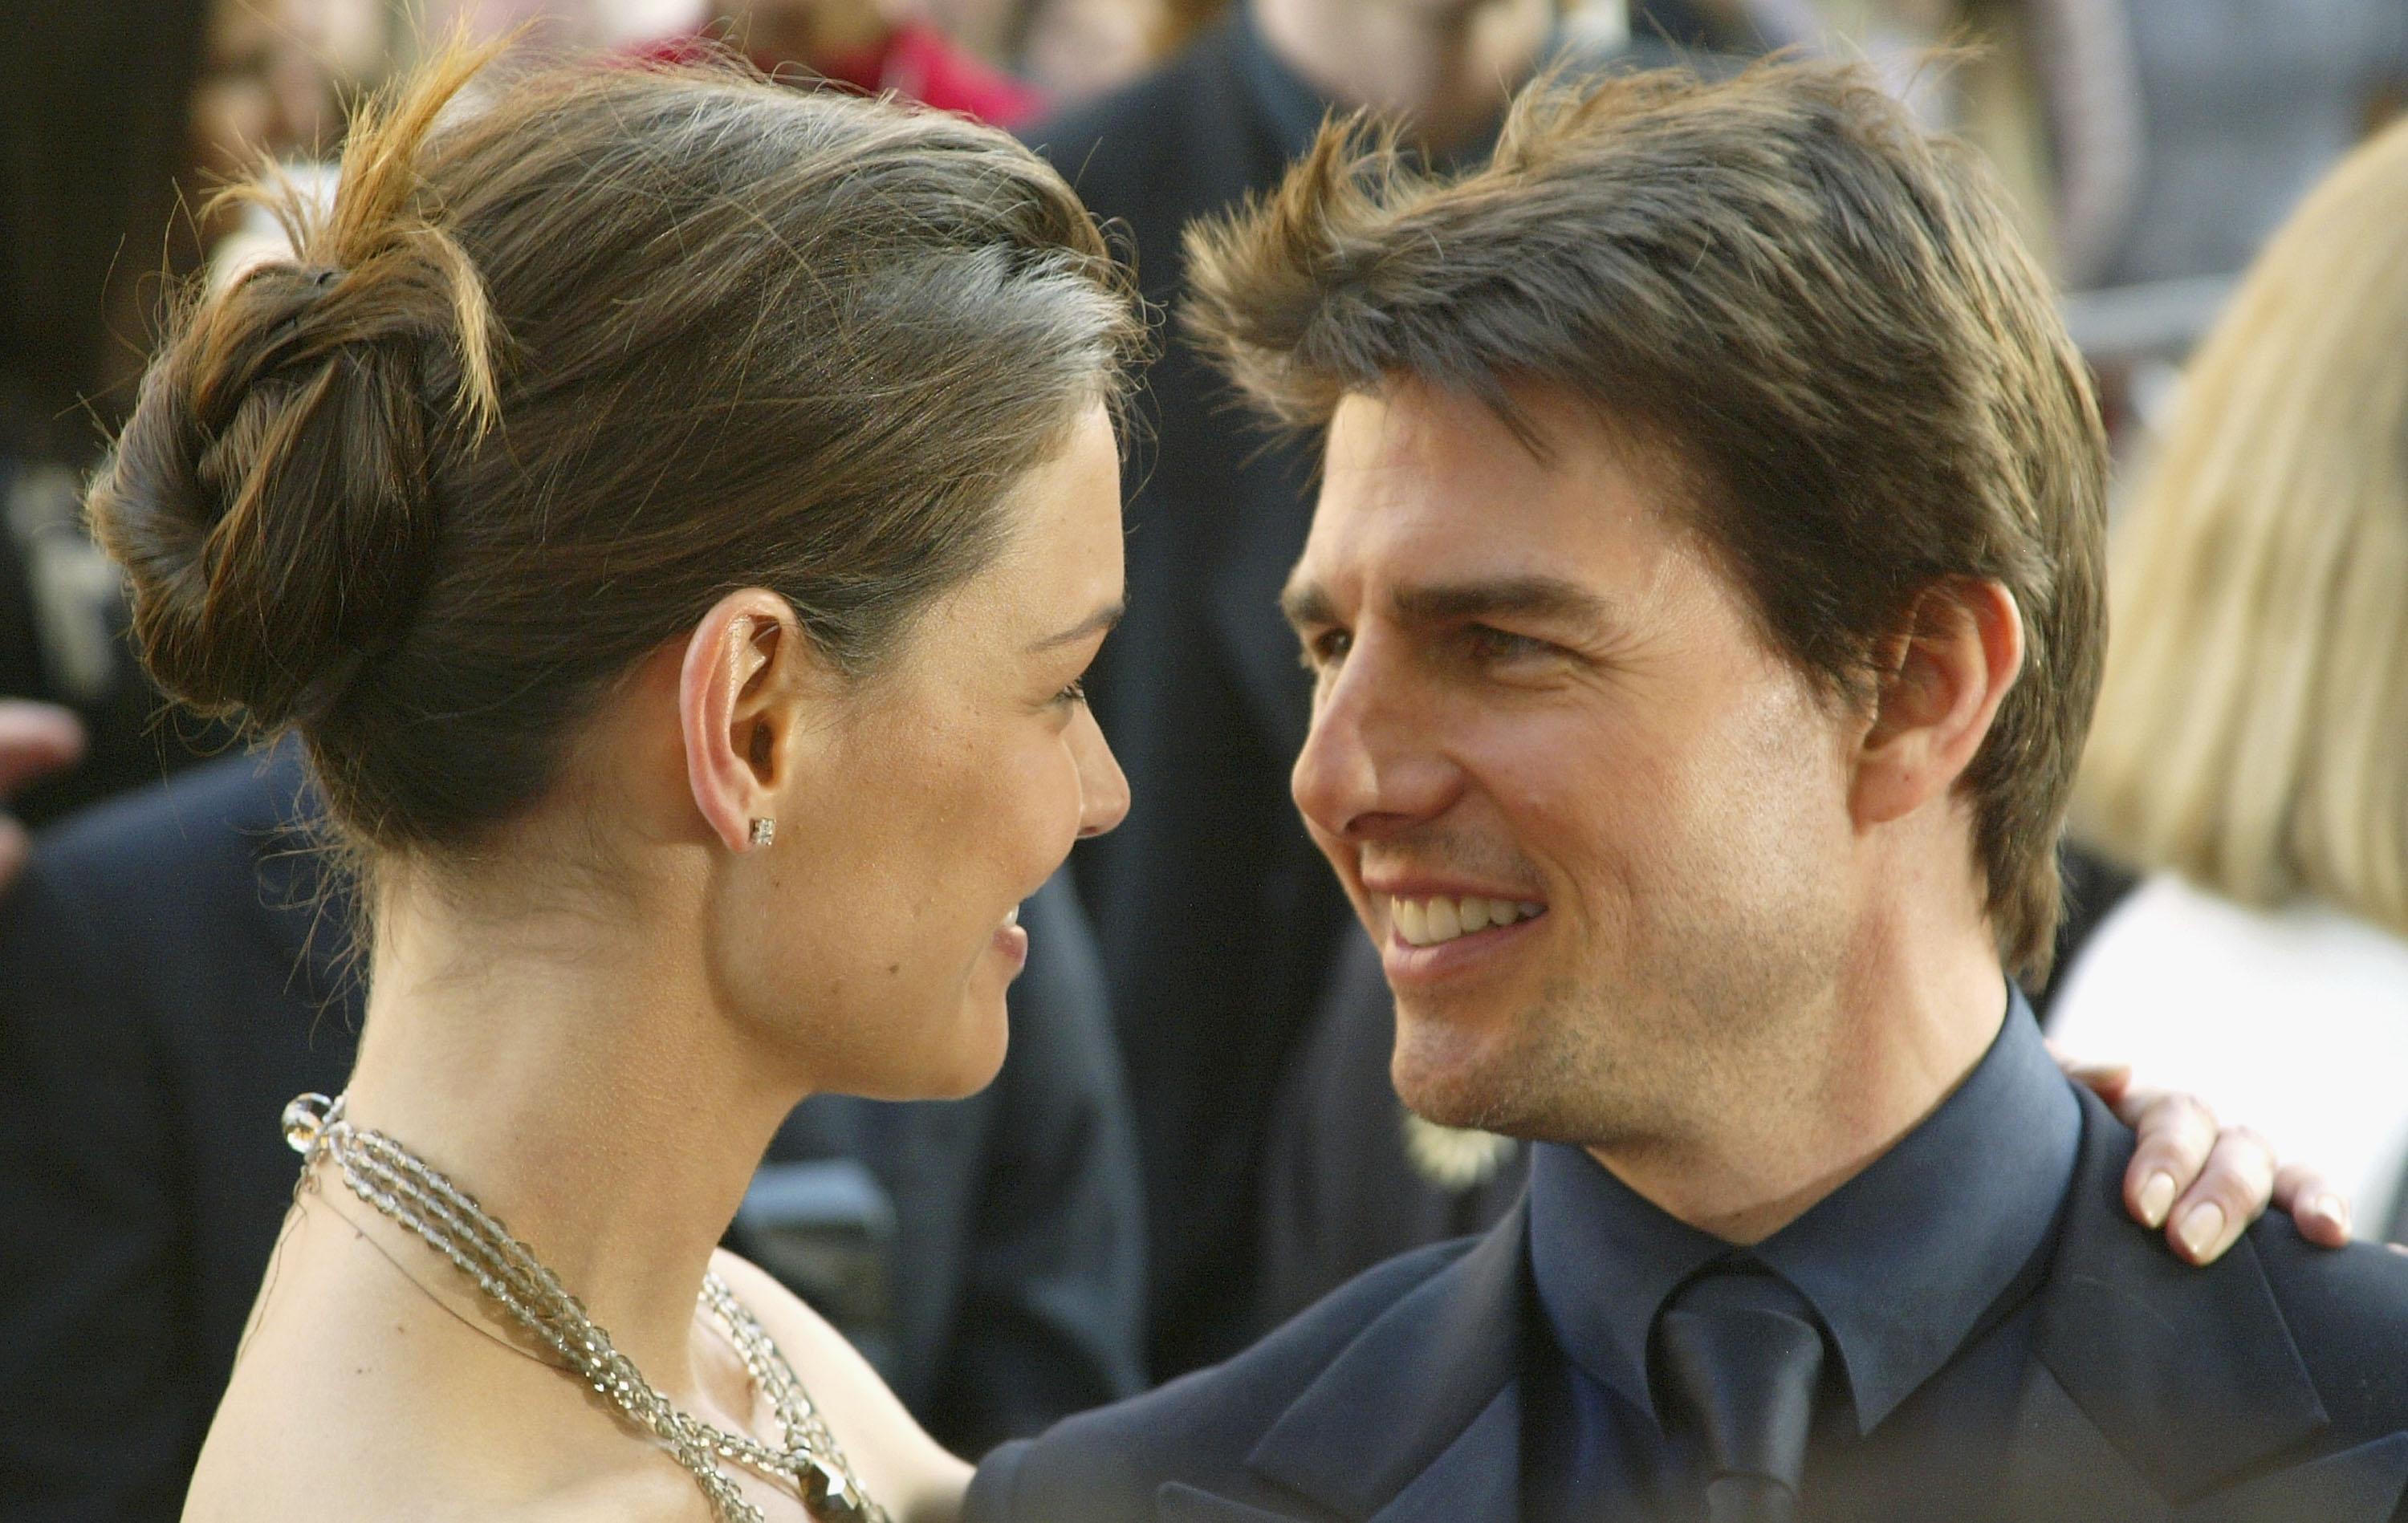 Tom Cruise and Katie Holmes on April 29, 2005 in Rome, Italy | Source: Getty Images